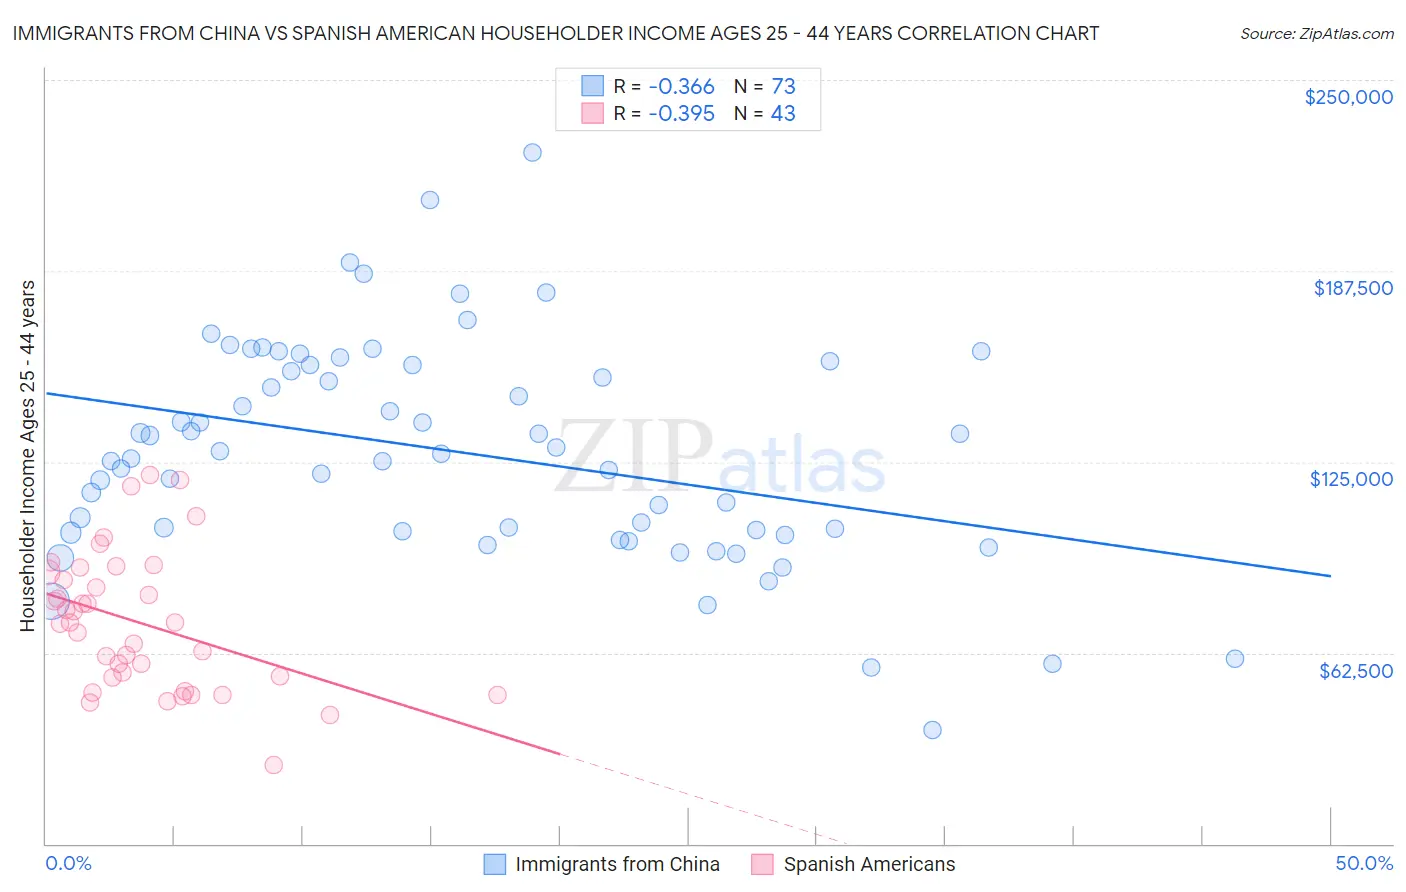 Immigrants from China vs Spanish American Householder Income Ages 25 - 44 years